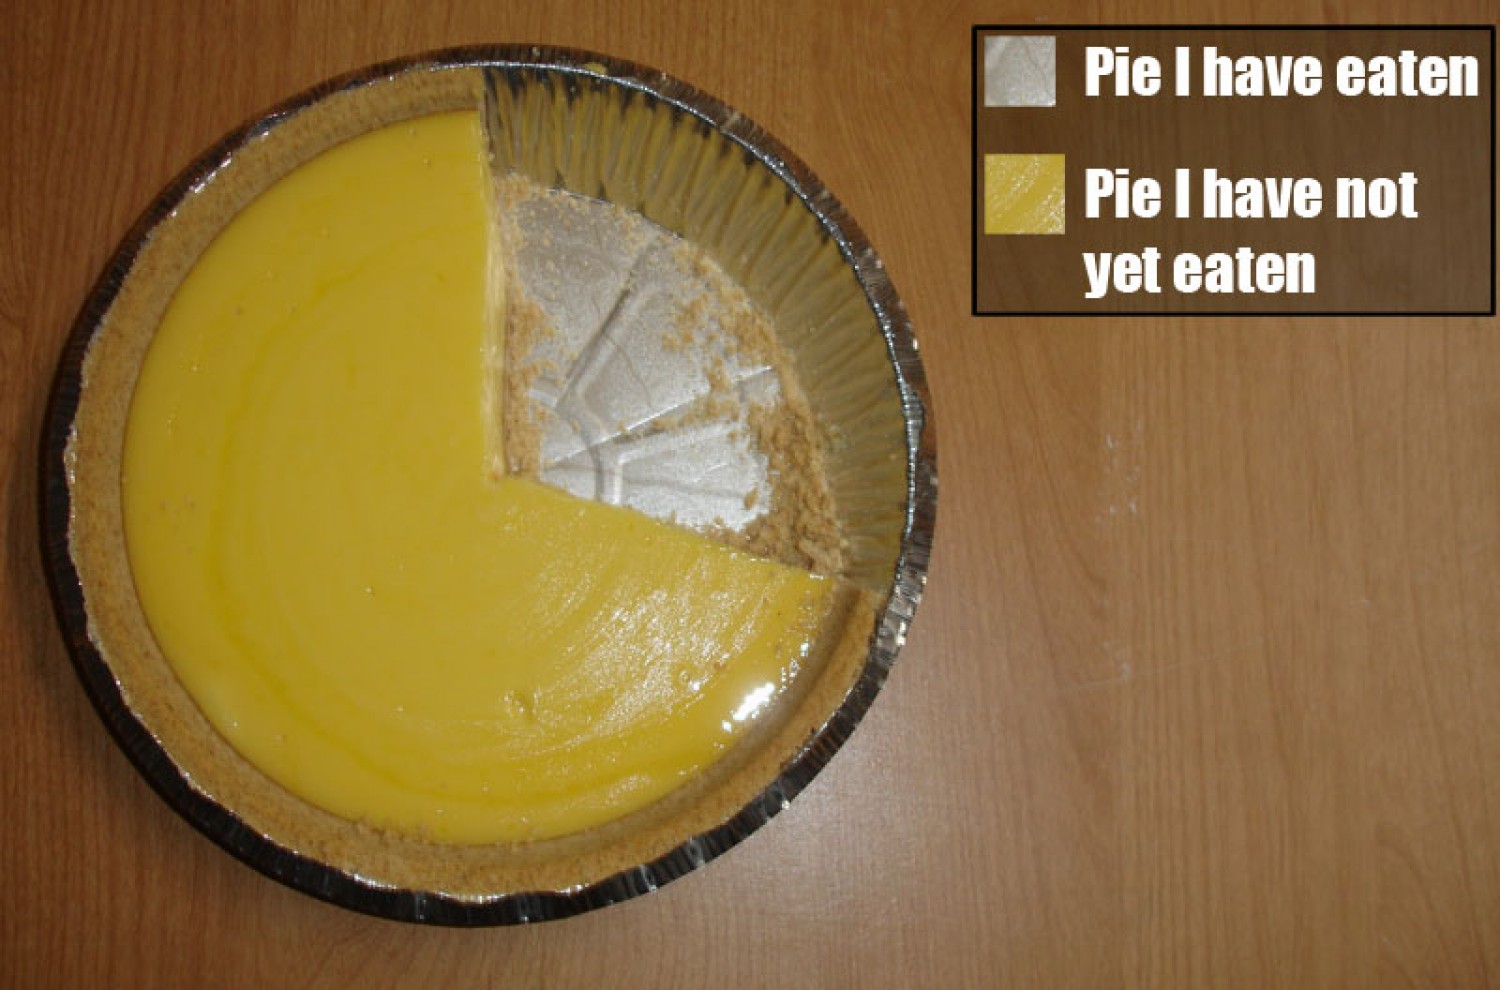 pie missing a section with legend that shows Pie I have eaten and Pie I have not yet eaten